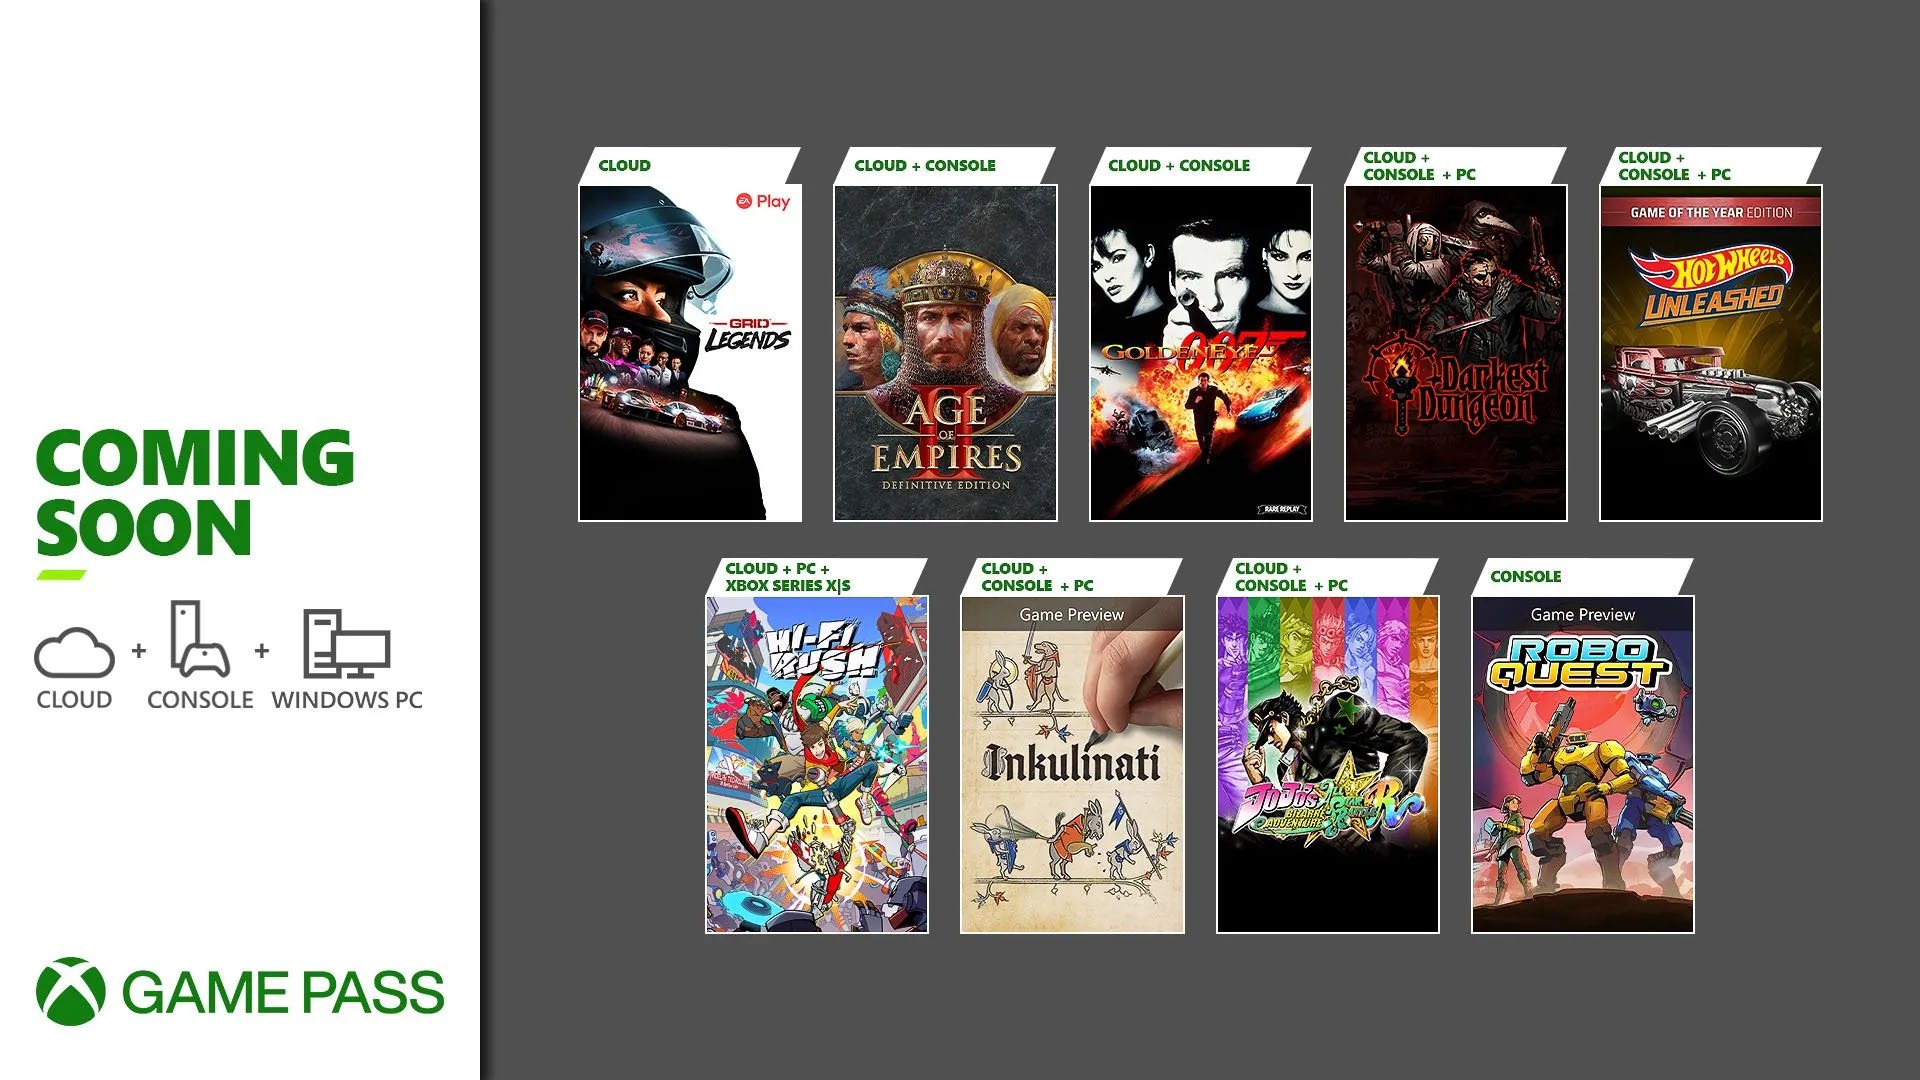 #
      Xbox Game Pass adds Hi-Fi RUSH, GoldenEye 007, JoJo’s Bizarre Adventure: All Star Battle R, and more in late January to early February